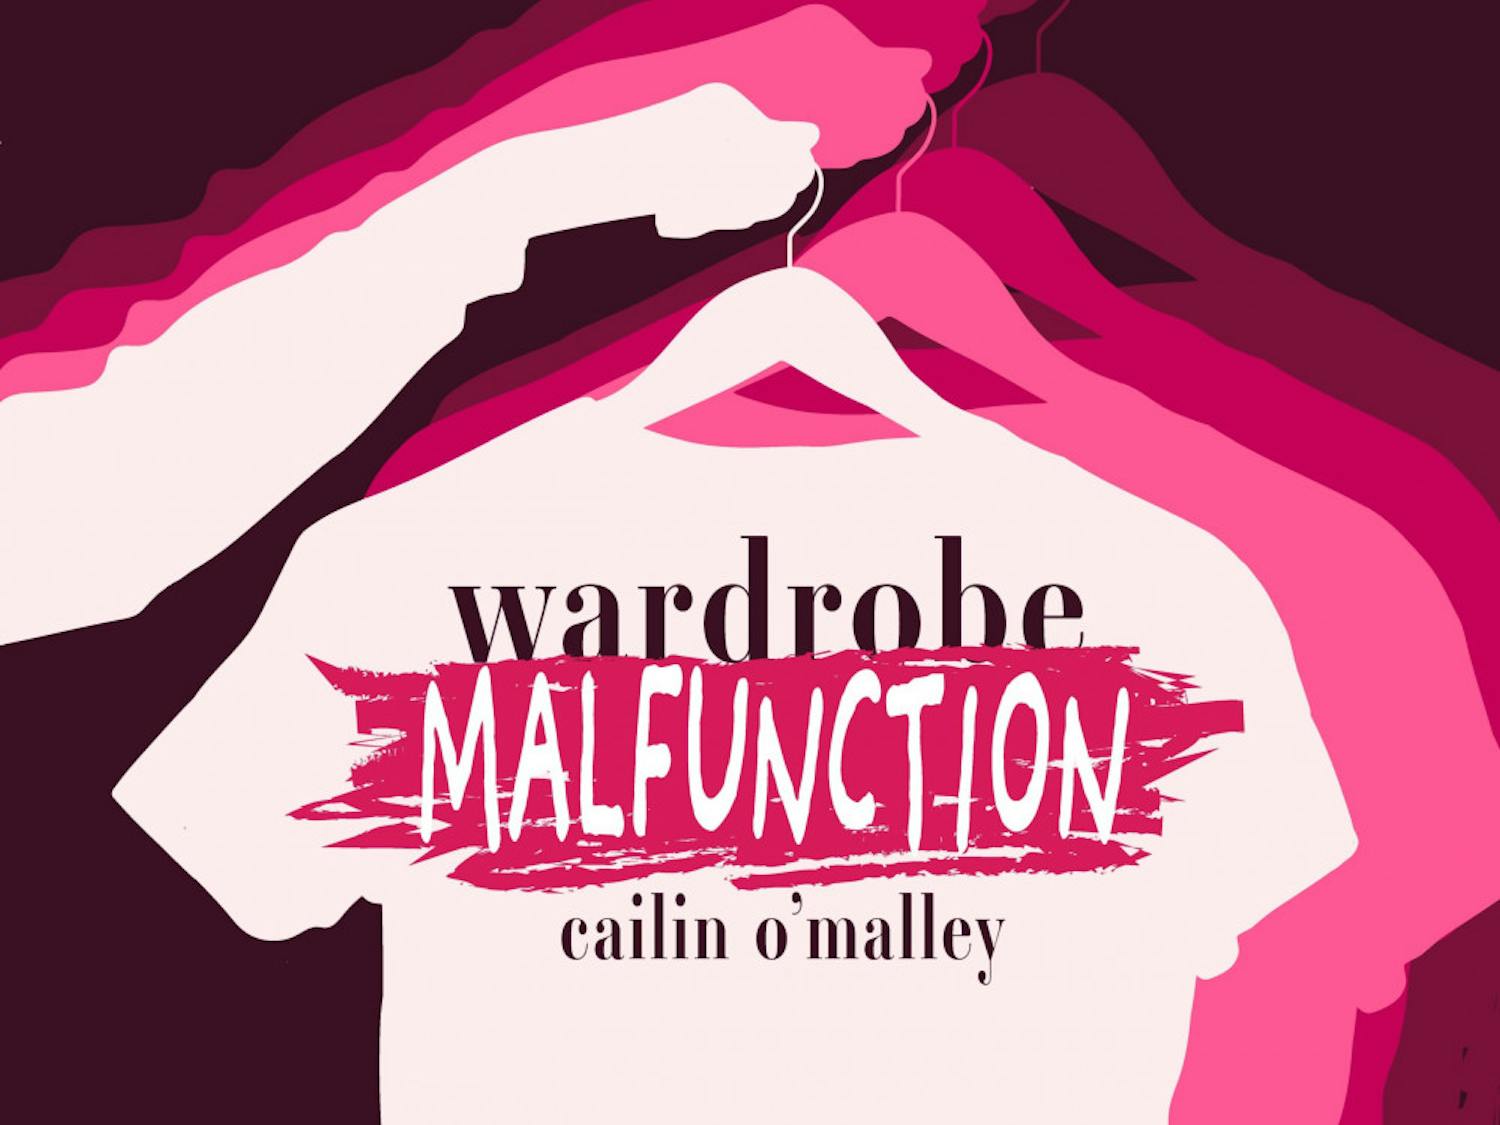 Header-Image-Cailin-OMalley-1-scaled